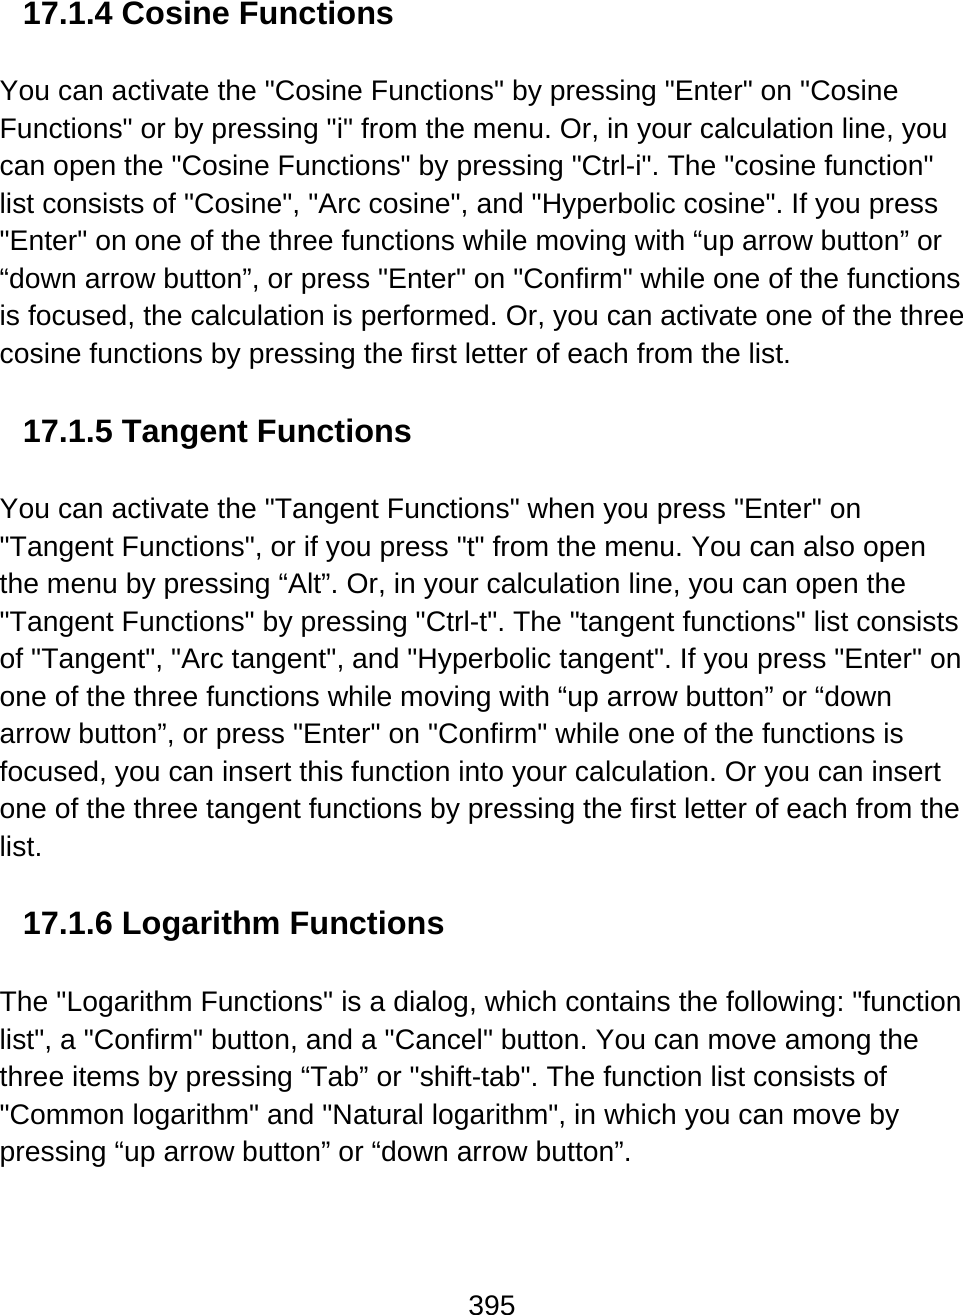 395  17.1.4 Cosine Functions  You can activate the &quot;Cosine Functions&quot; by pressing &quot;Enter&quot; on &quot;Cosine Functions&quot; or by pressing &quot;i&quot; from the menu. Or, in your calculation line, you can open the &quot;Cosine Functions&quot; by pressing &quot;Ctrl-i&quot;. The &quot;cosine function&quot; list consists of &quot;Cosine&quot;, &quot;Arc cosine&quot;, and &quot;Hyperbolic cosine&quot;. If you press &quot;Enter&quot; on one of the three functions while moving with “up arrow button” or “down arrow button”, or press &quot;Enter&quot; on &quot;Confirm&quot; while one of the functions is focused, the calculation is performed. Or, you can activate one of the three cosine functions by pressing the first letter of each from the list.  17.1.5 Tangent Functions  You can activate the &quot;Tangent Functions&quot; when you press &quot;Enter&quot; on &quot;Tangent Functions&quot;, or if you press &quot;t&quot; from the menu. You can also open the menu by pressing “Alt”. Or, in your calculation line, you can open the &quot;Tangent Functions&quot; by pressing &quot;Ctrl-t&quot;. The &quot;tangent functions&quot; list consists of &quot;Tangent&quot;, &quot;Arc tangent&quot;, and &quot;Hyperbolic tangent&quot;. If you press &quot;Enter&quot; on one of the three functions while moving with “up arrow button” or “down arrow button”, or press &quot;Enter&quot; on &quot;Confirm&quot; while one of the functions is focused, you can insert this function into your calculation. Or you can insert one of the three tangent functions by pressing the first letter of each from the list.  17.1.6 Logarithm Functions  The &quot;Logarithm Functions&quot; is a dialog, which contains the following: &quot;function list&quot;, a &quot;Confirm&quot; button, and a &quot;Cancel&quot; button. You can move among the three items by pressing “Tab” or &quot;shift-tab&quot;. The function list consists of &quot;Common logarithm&quot; and &quot;Natural logarithm&quot;, in which you can move by pressing “up arrow button” or “down arrow button”. 